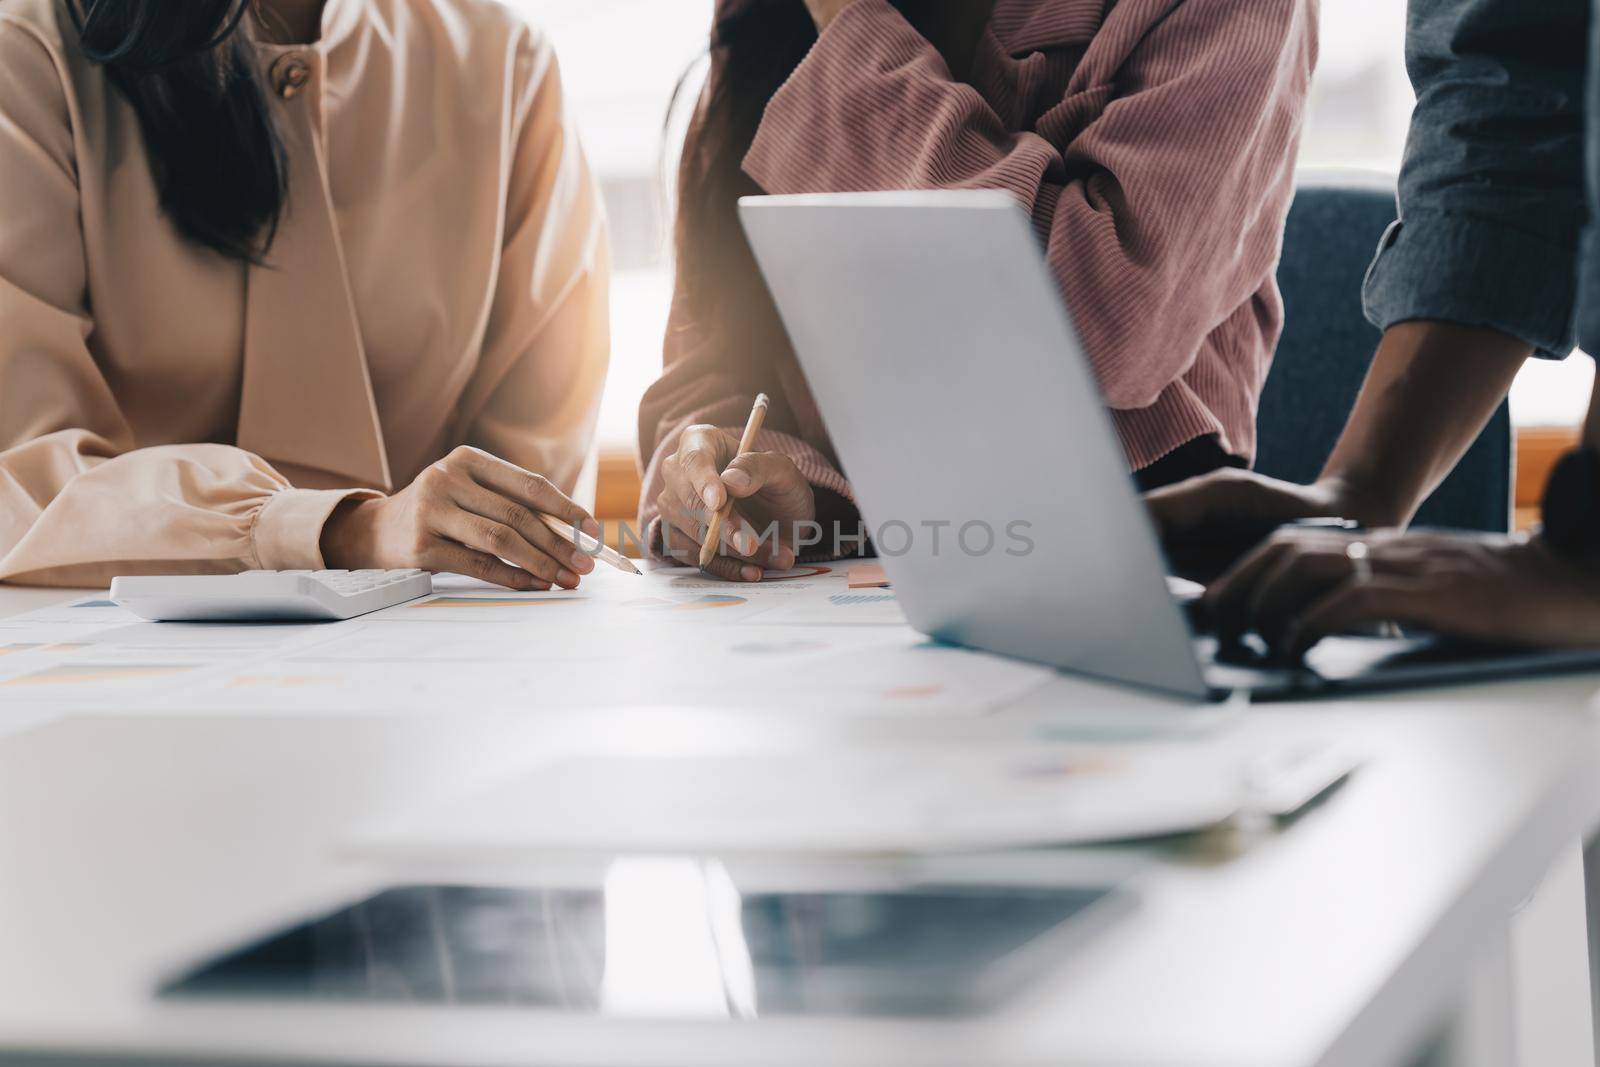 Group of business people working at workplace. Business team hands at working with financial plan, meeting, discussion, brainstorm with tablet on office desk